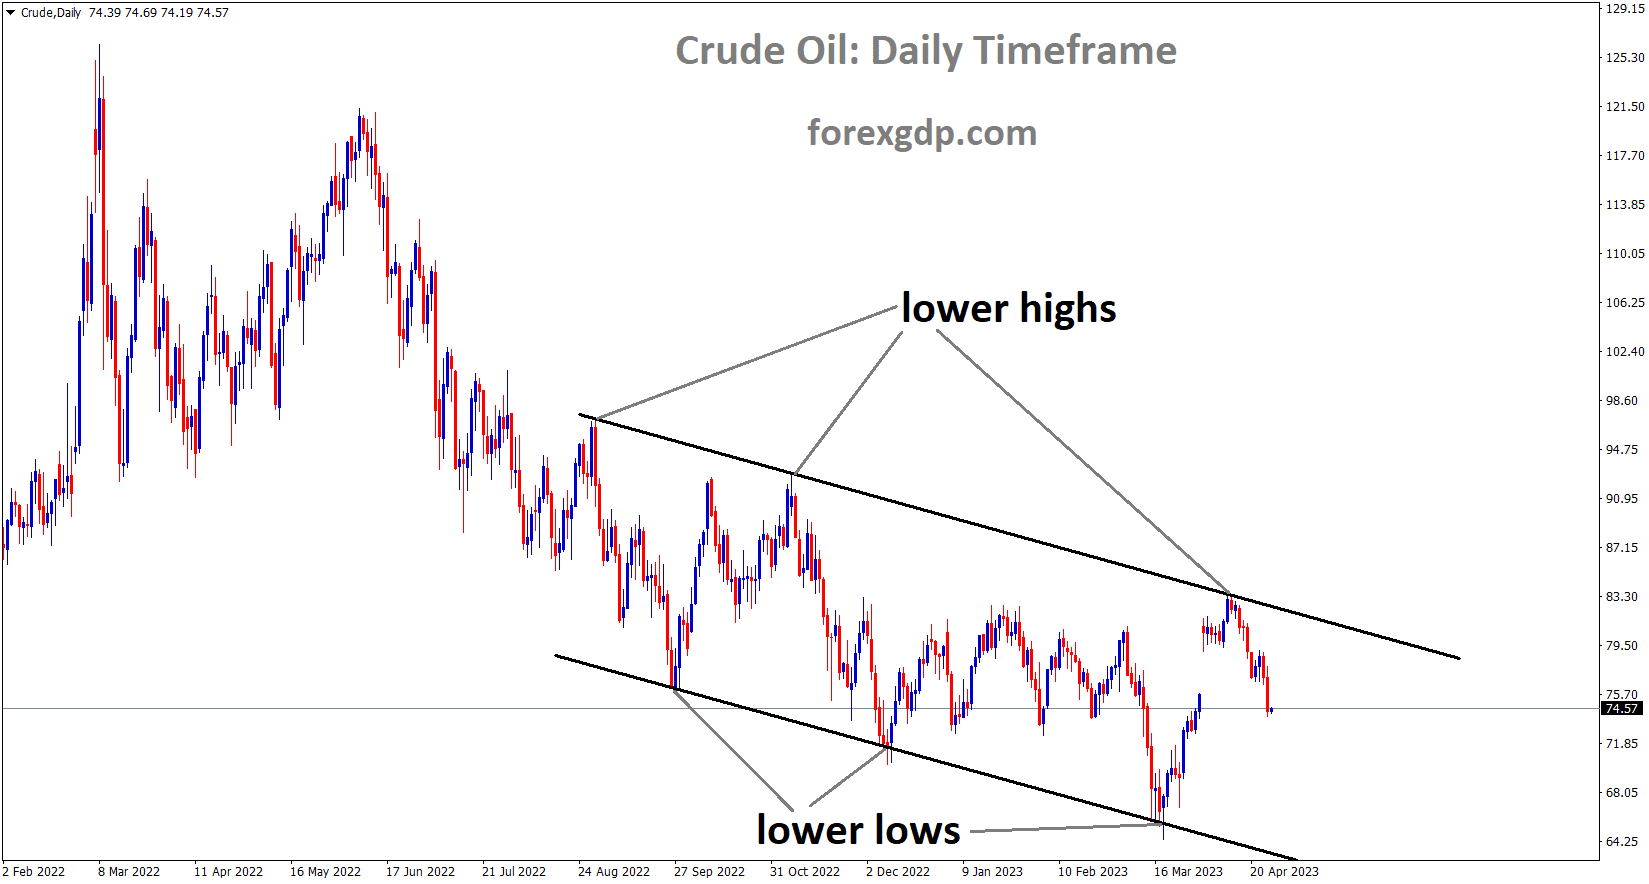 Crude Oil price is moving in the Descending channel and the market has fallen from the lower high area of the channel 1